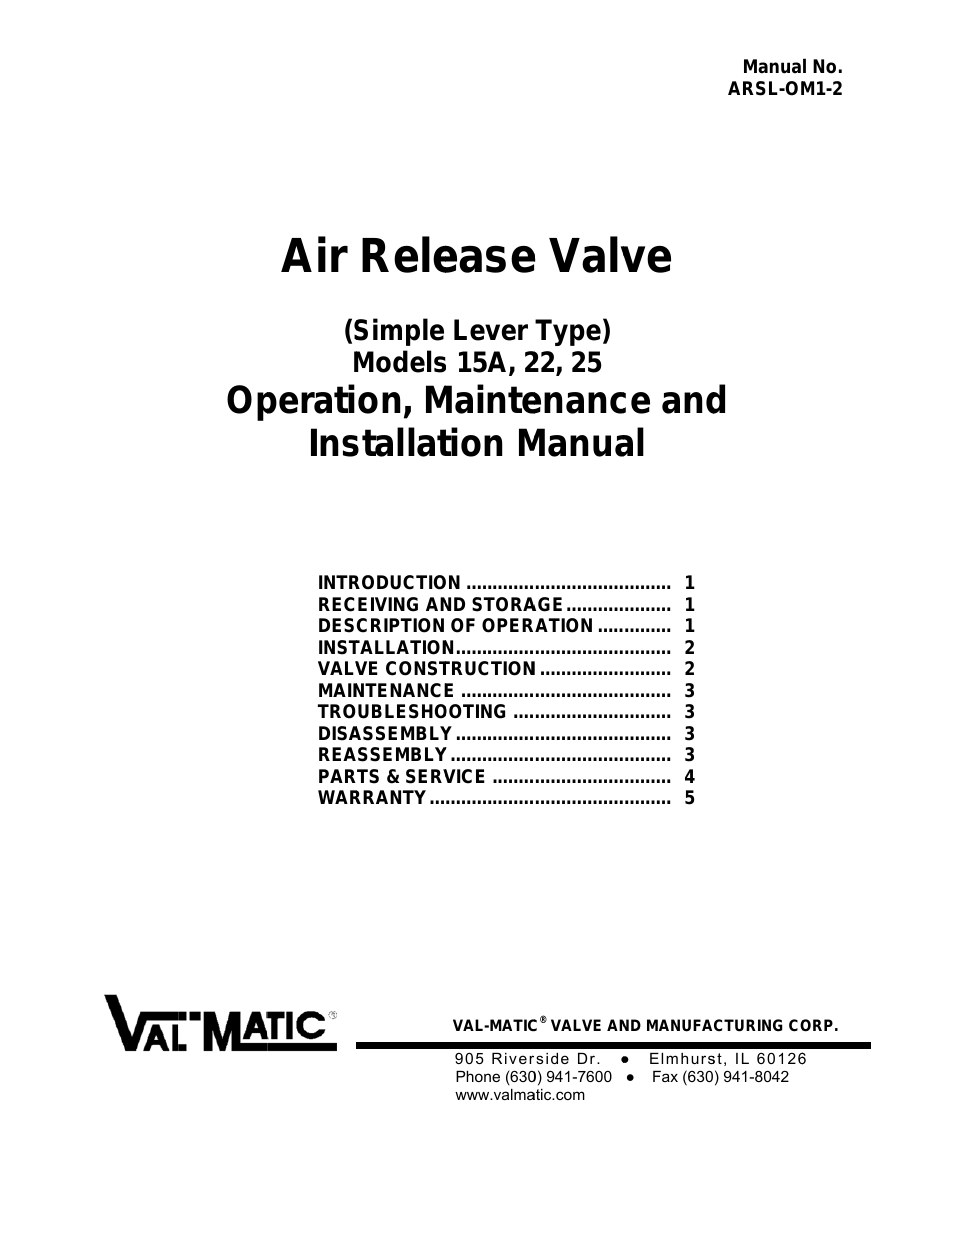 15A Air Release Valve (Simple Lever Type)